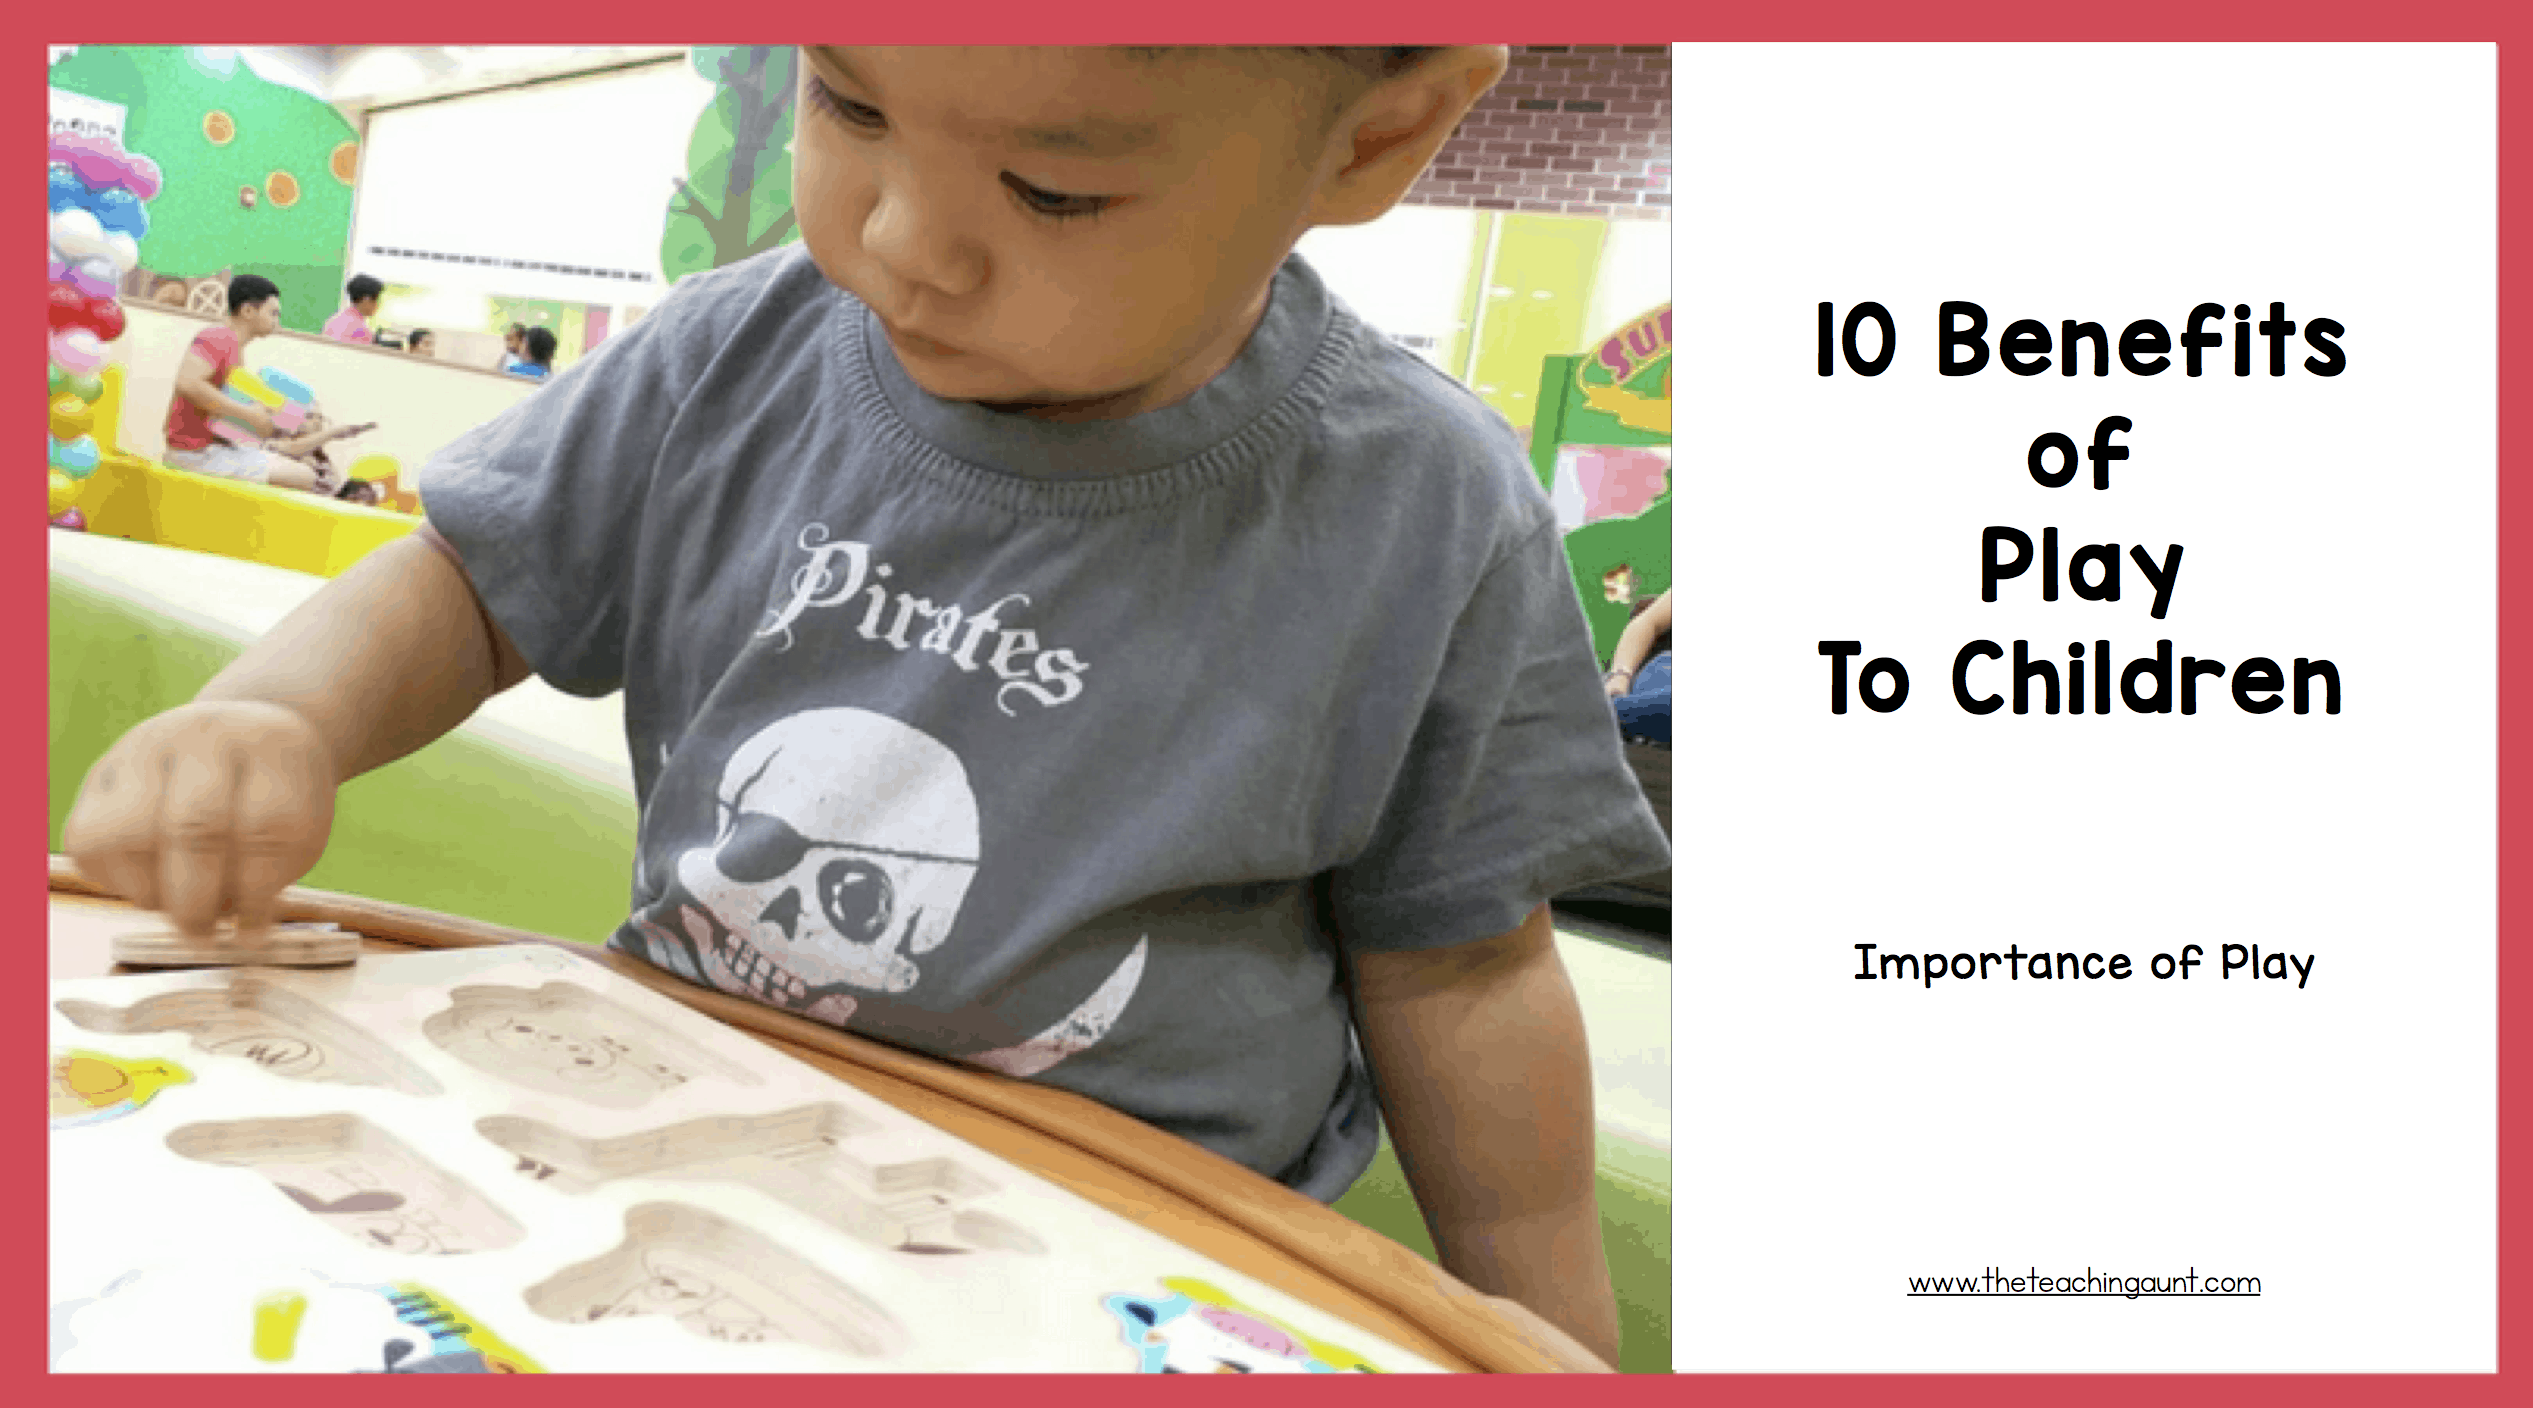 Benefits of Play For Children